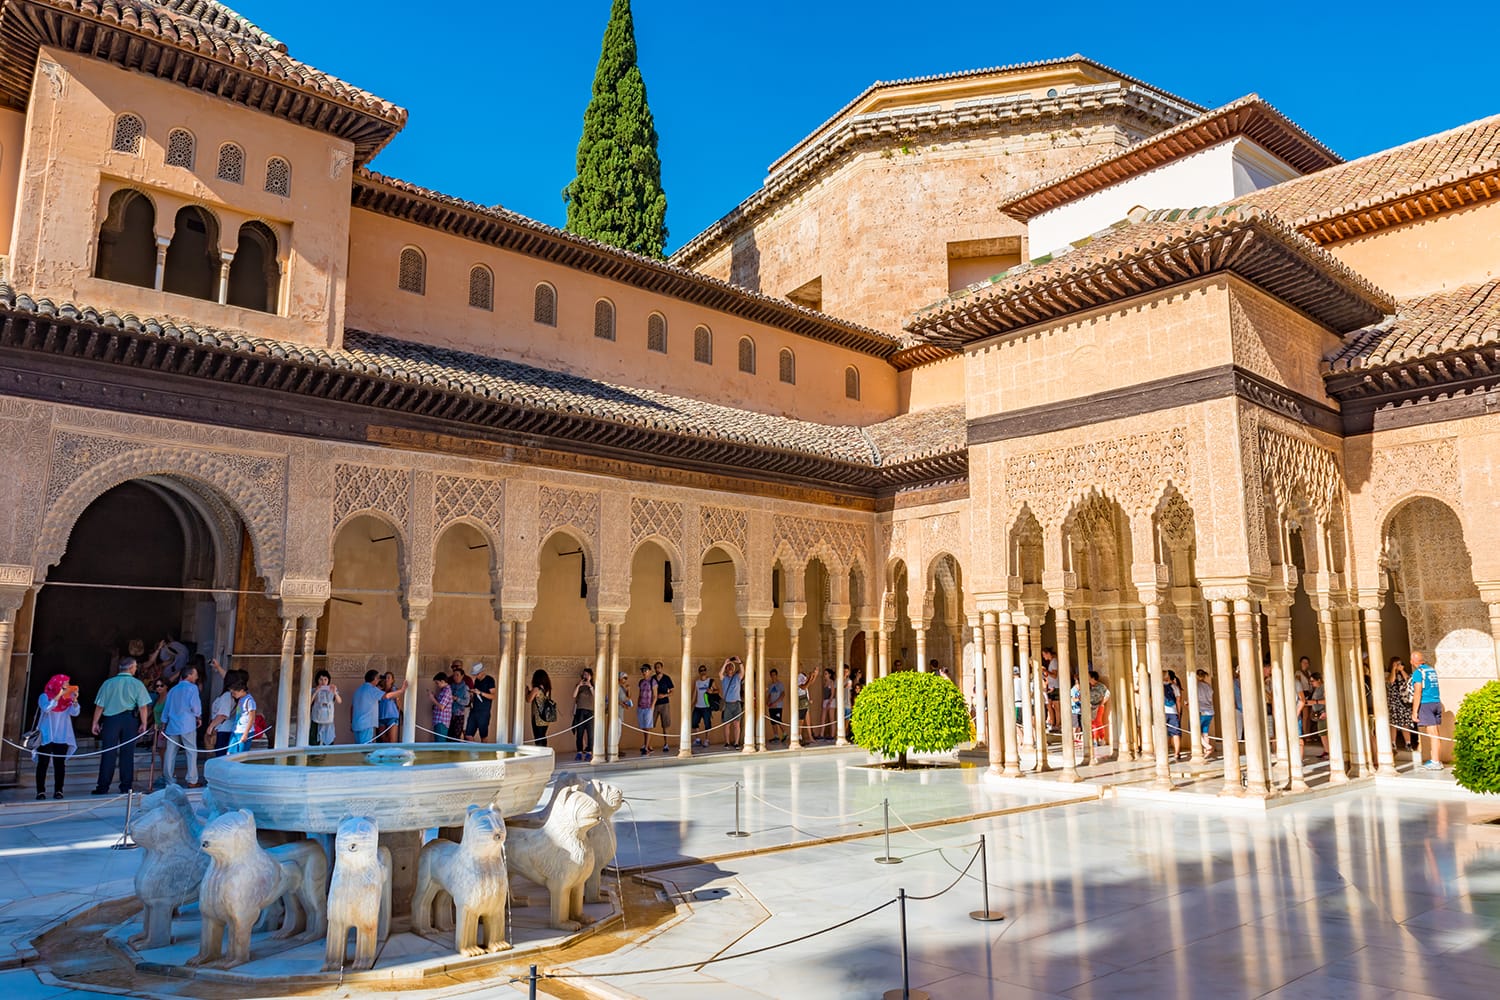 Patio de los Leones (Court of the Lions) of the Nasrid dynasty Palace of the Lions in the Alhambra, Granada, Andalusia, Spain